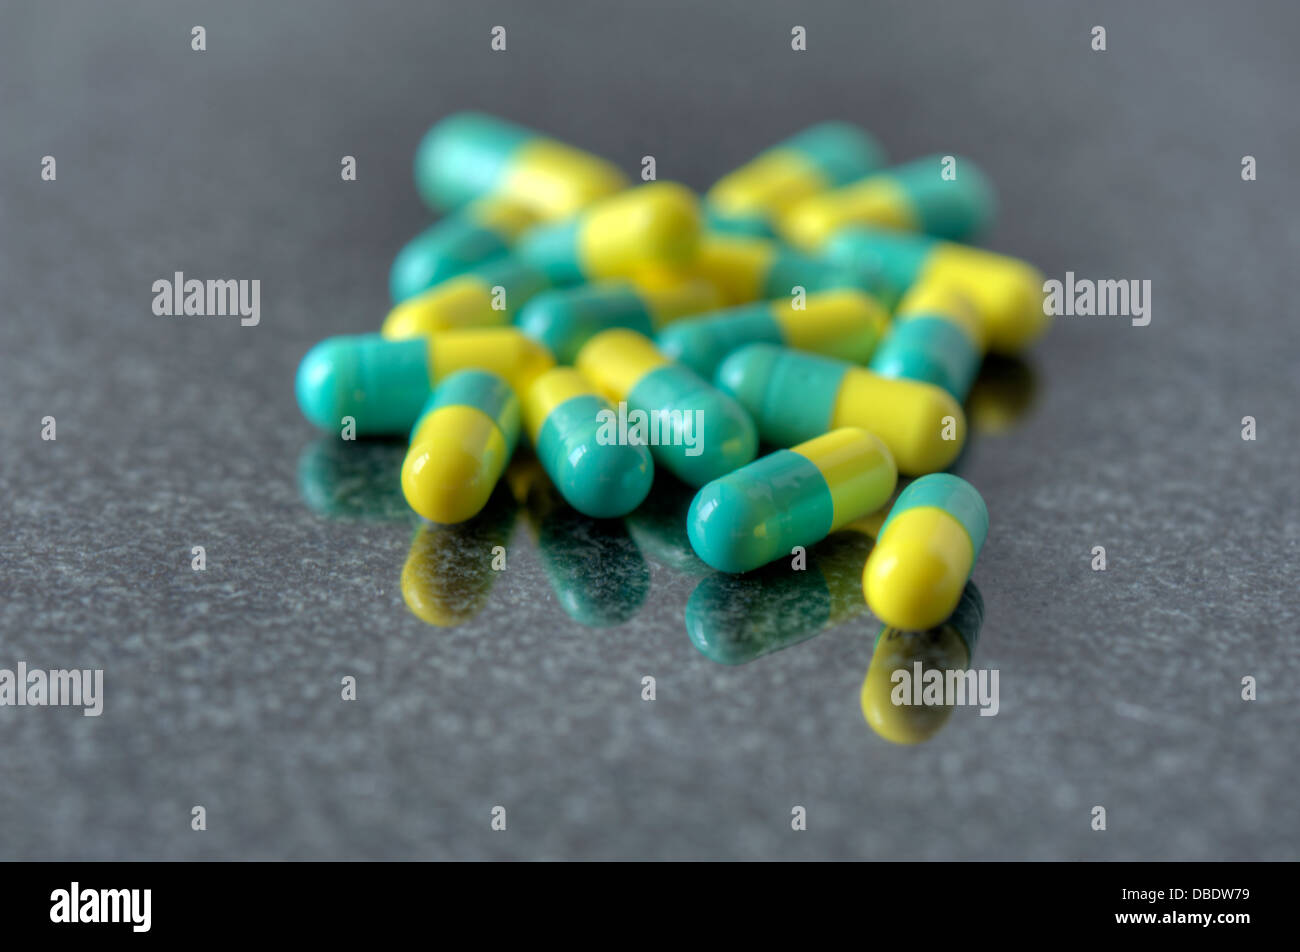 Close-up of prescription drugs - green/yellow capsules Stock Photo